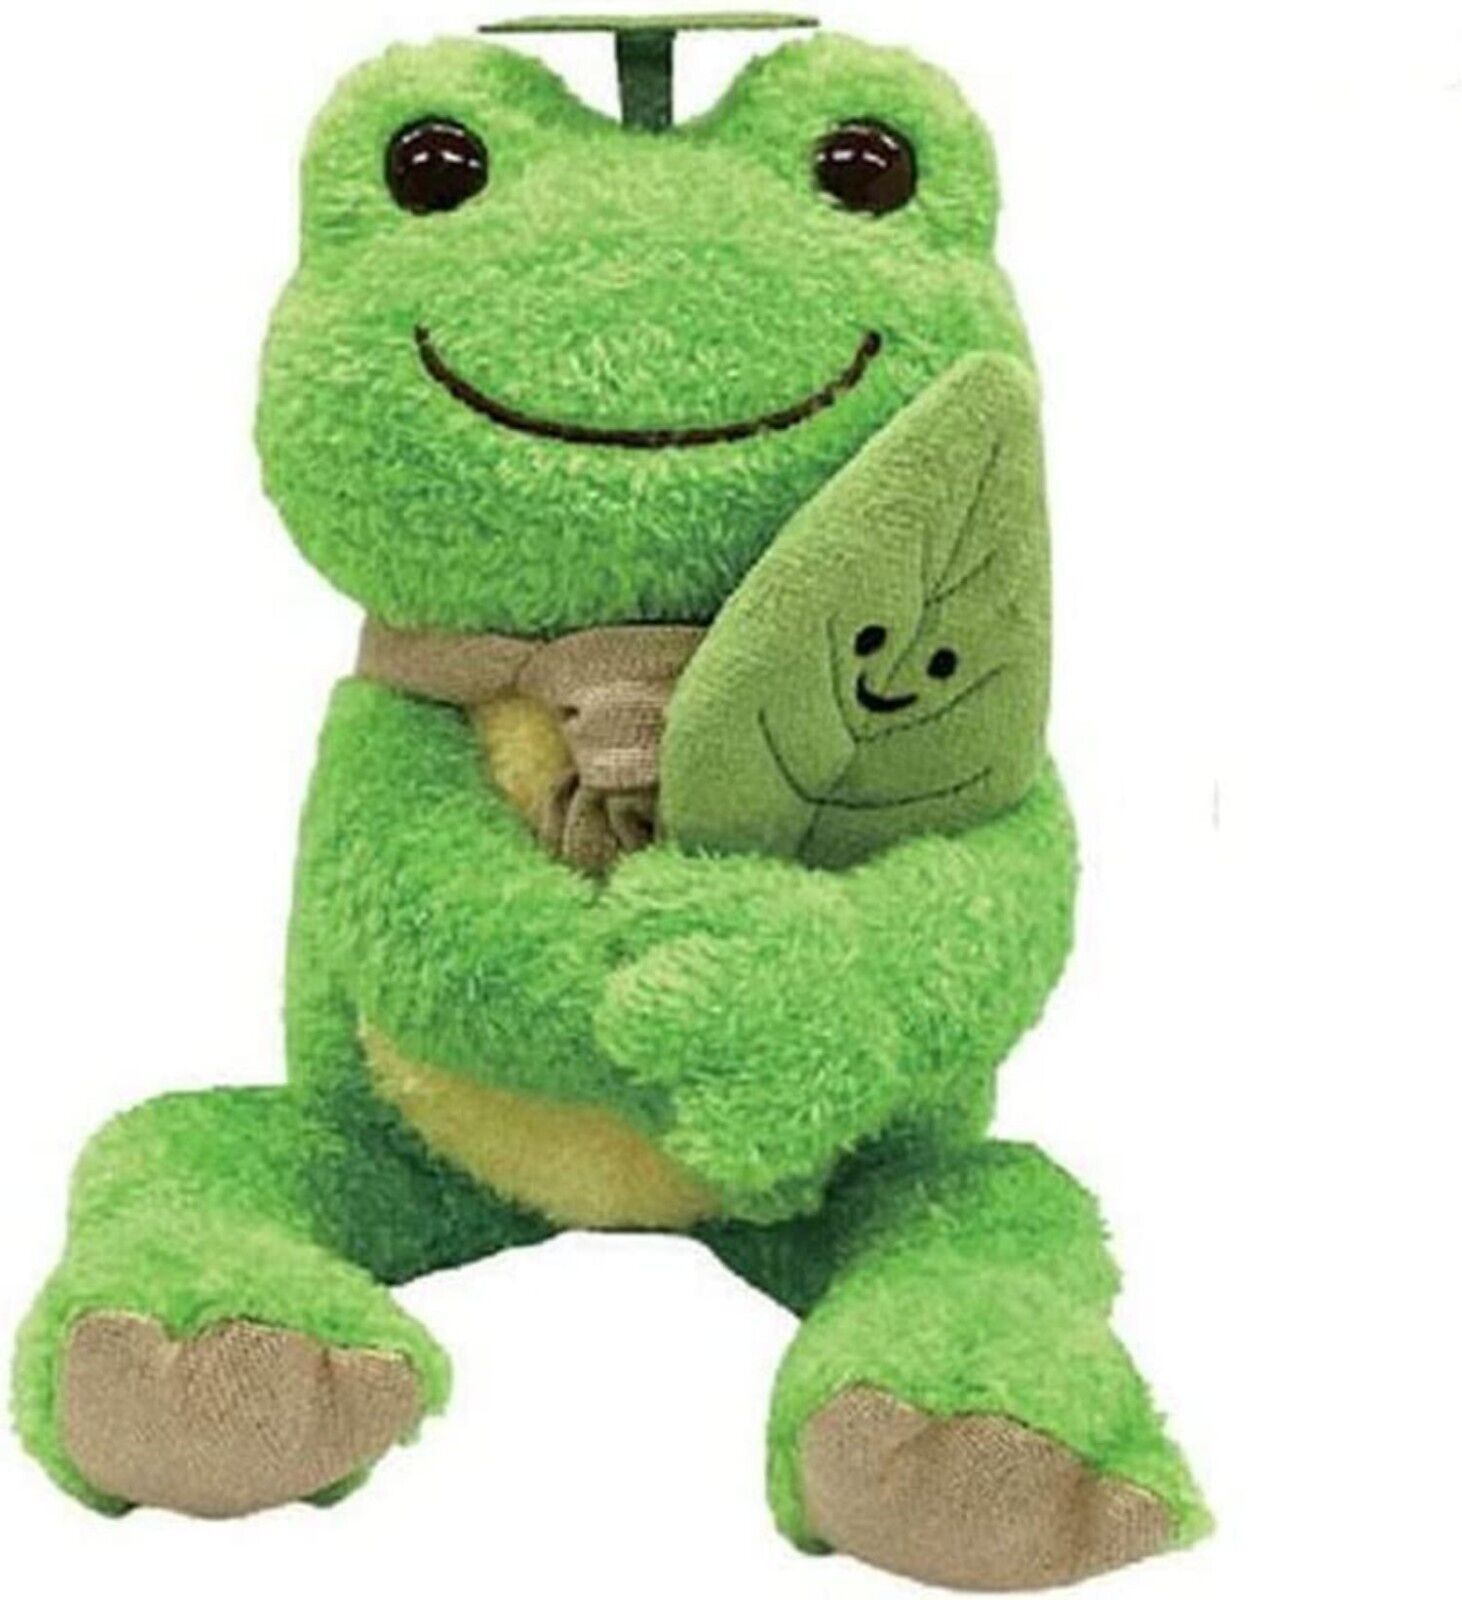 Earth & Pickles the Frog Bean Doll Stuffed Toy ( Leaf ) Plush New Japan